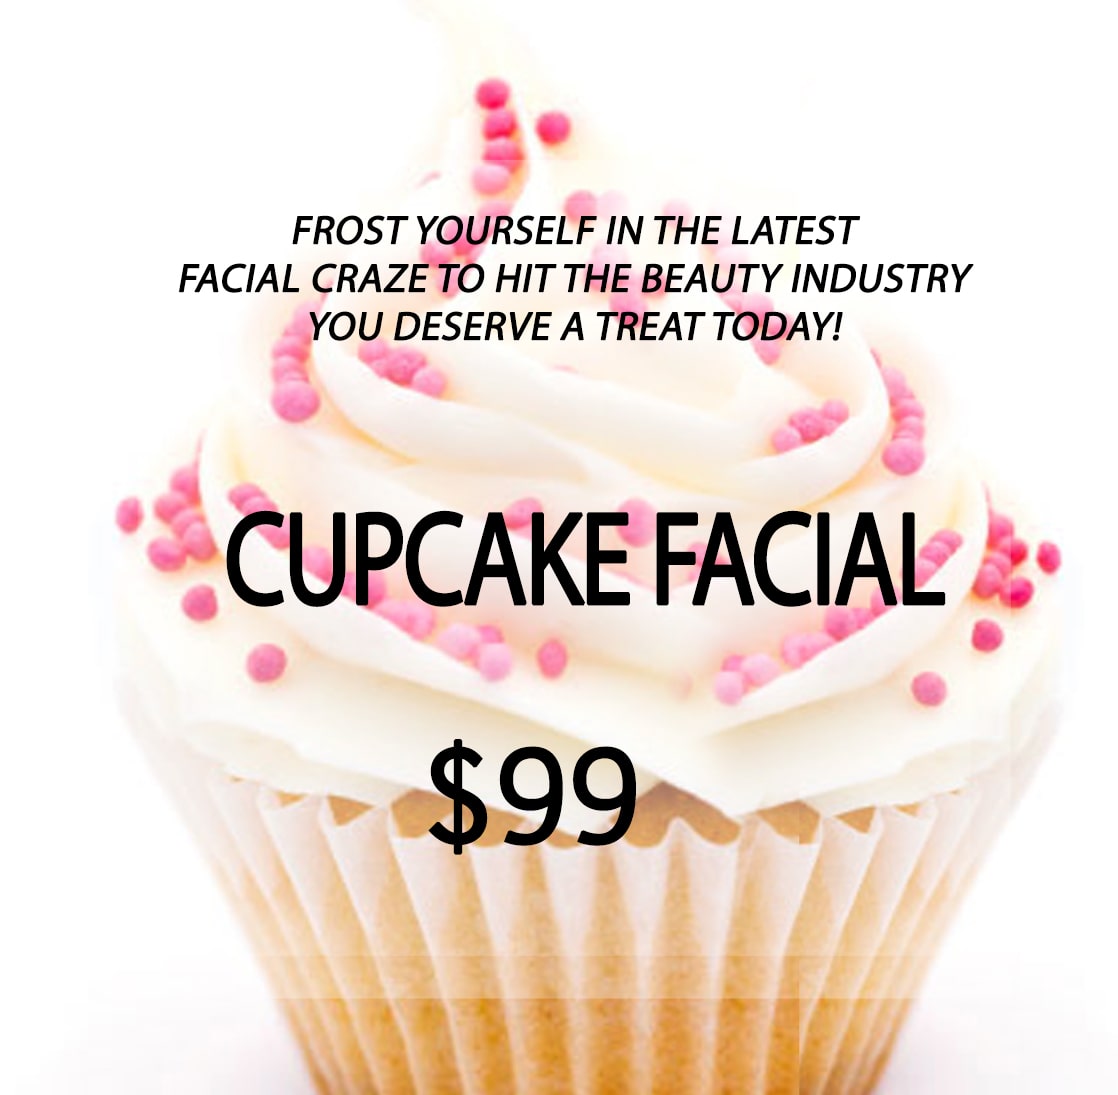 cupcake facial ut beauty lab and laser